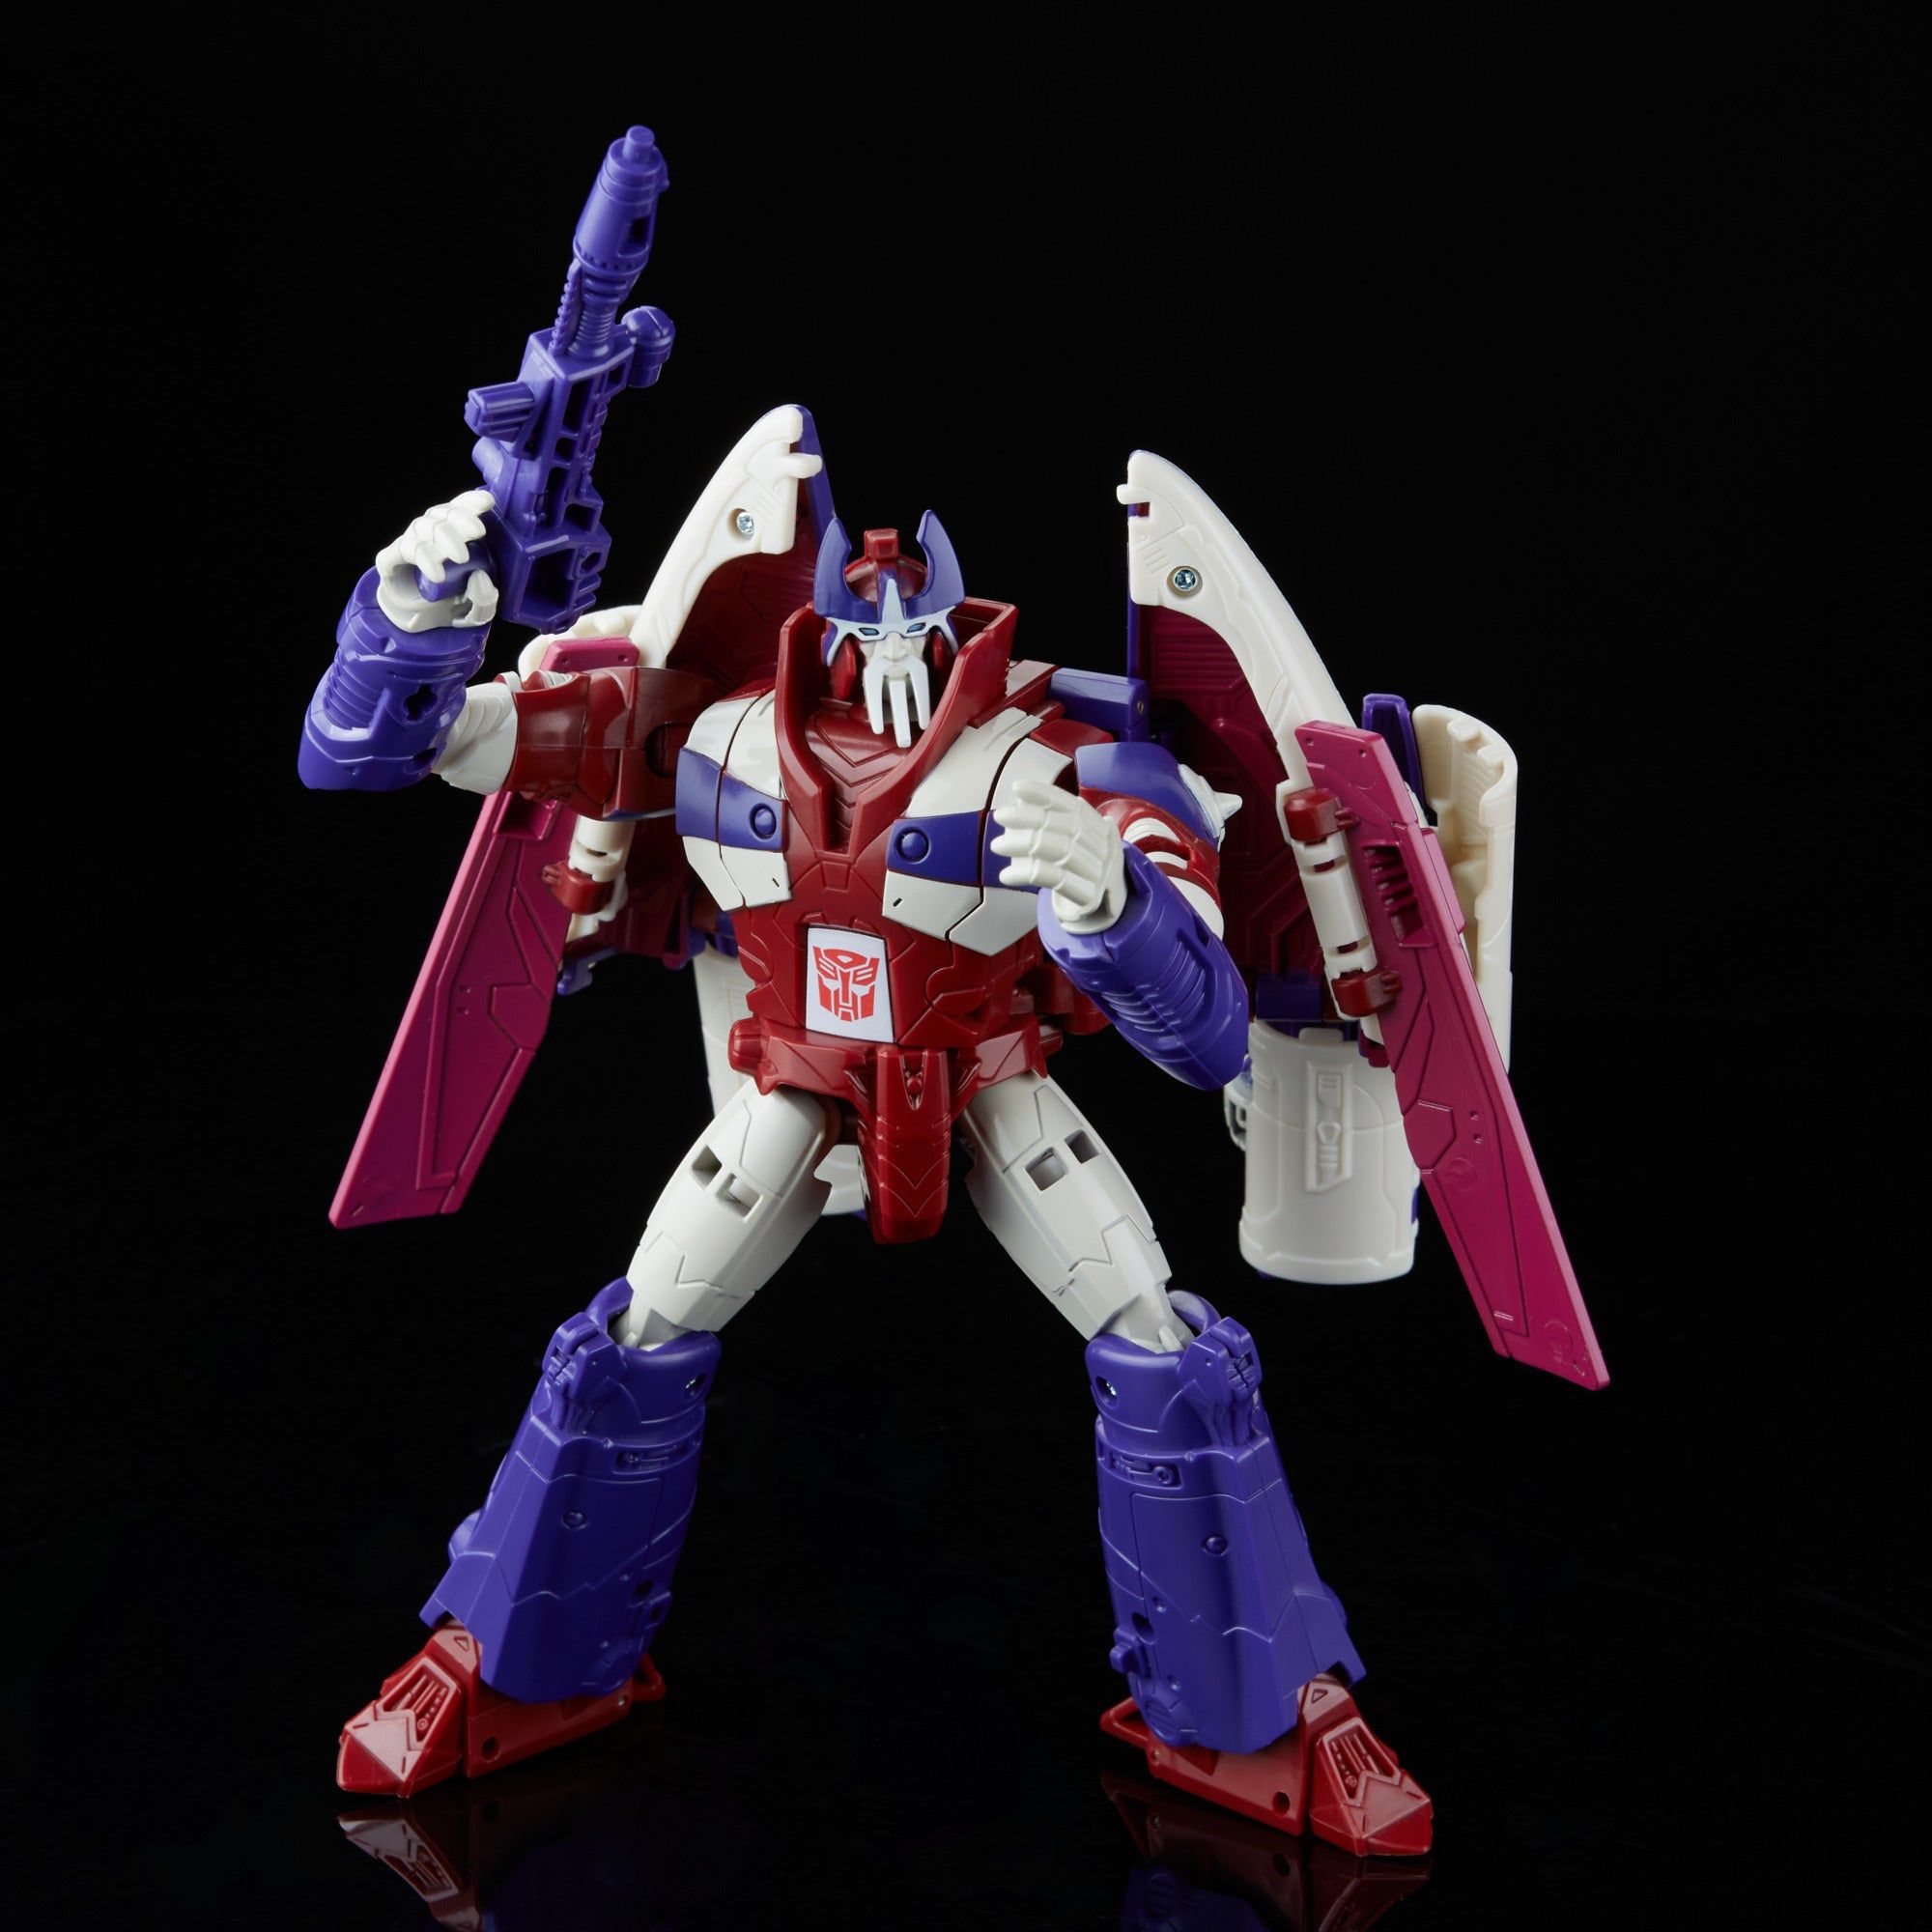 Alpha Trion robot form toy from Hasbro